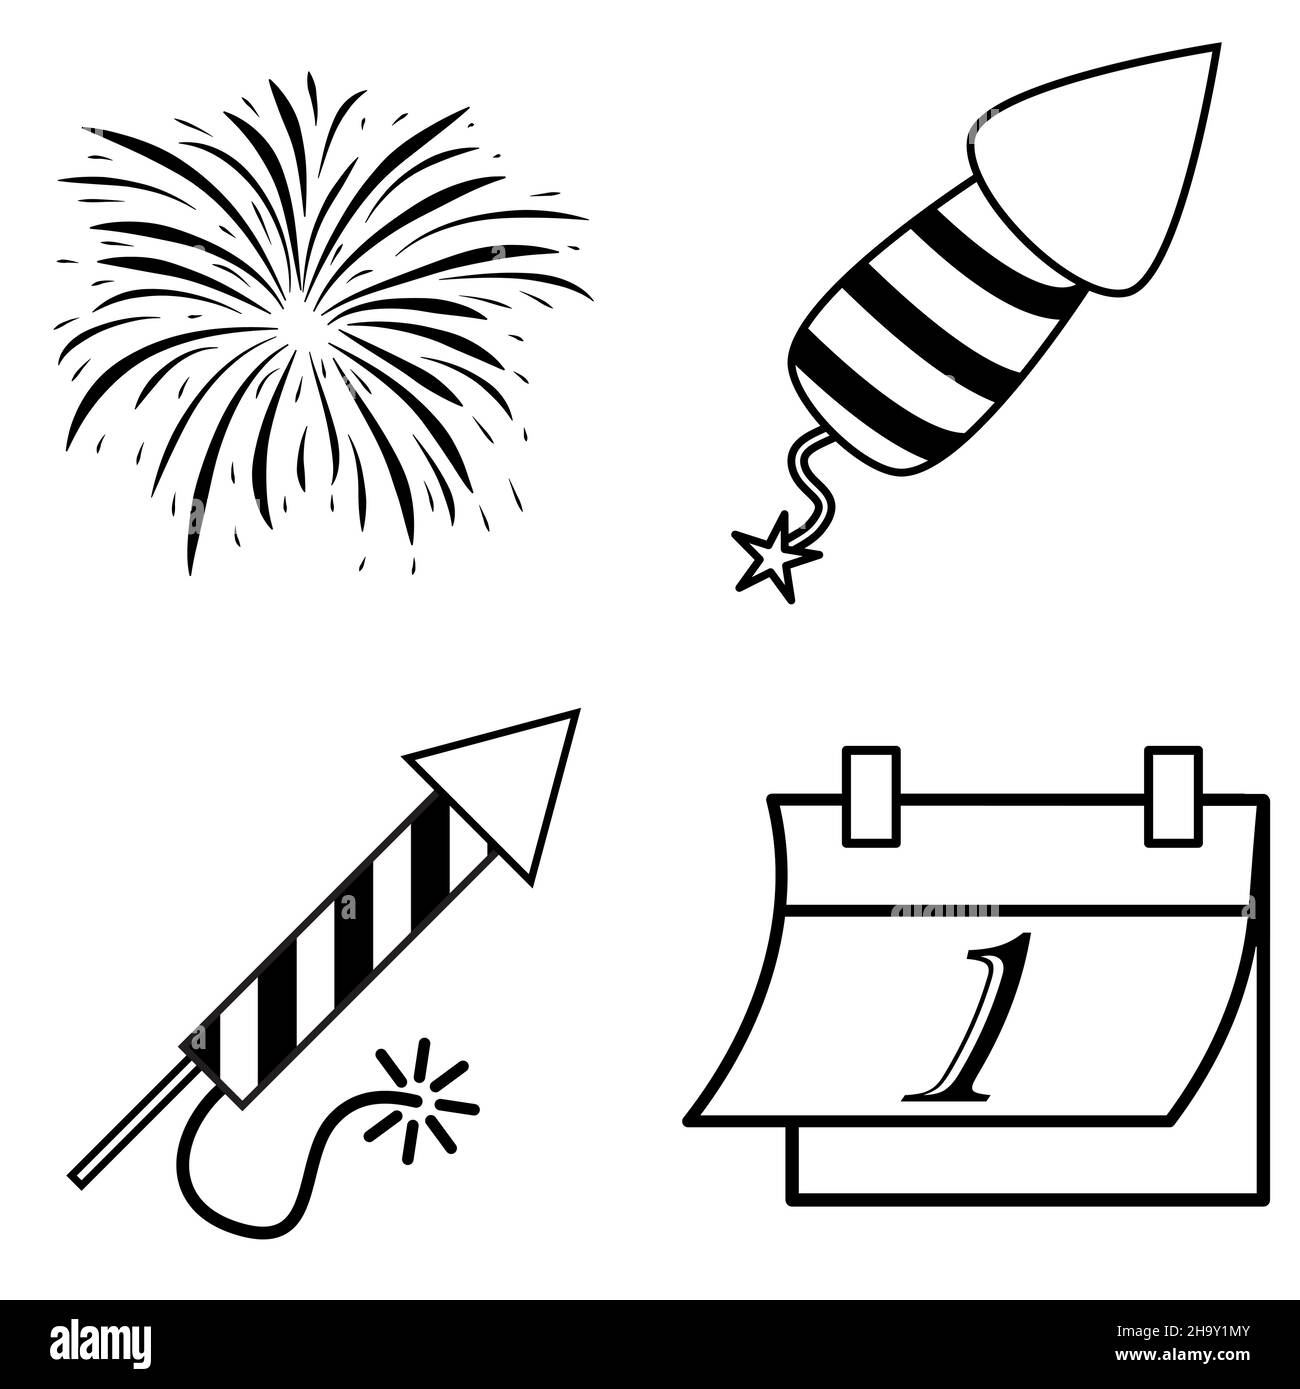 new year icon set. Outline and silhouette symbol collection. Stock Vector